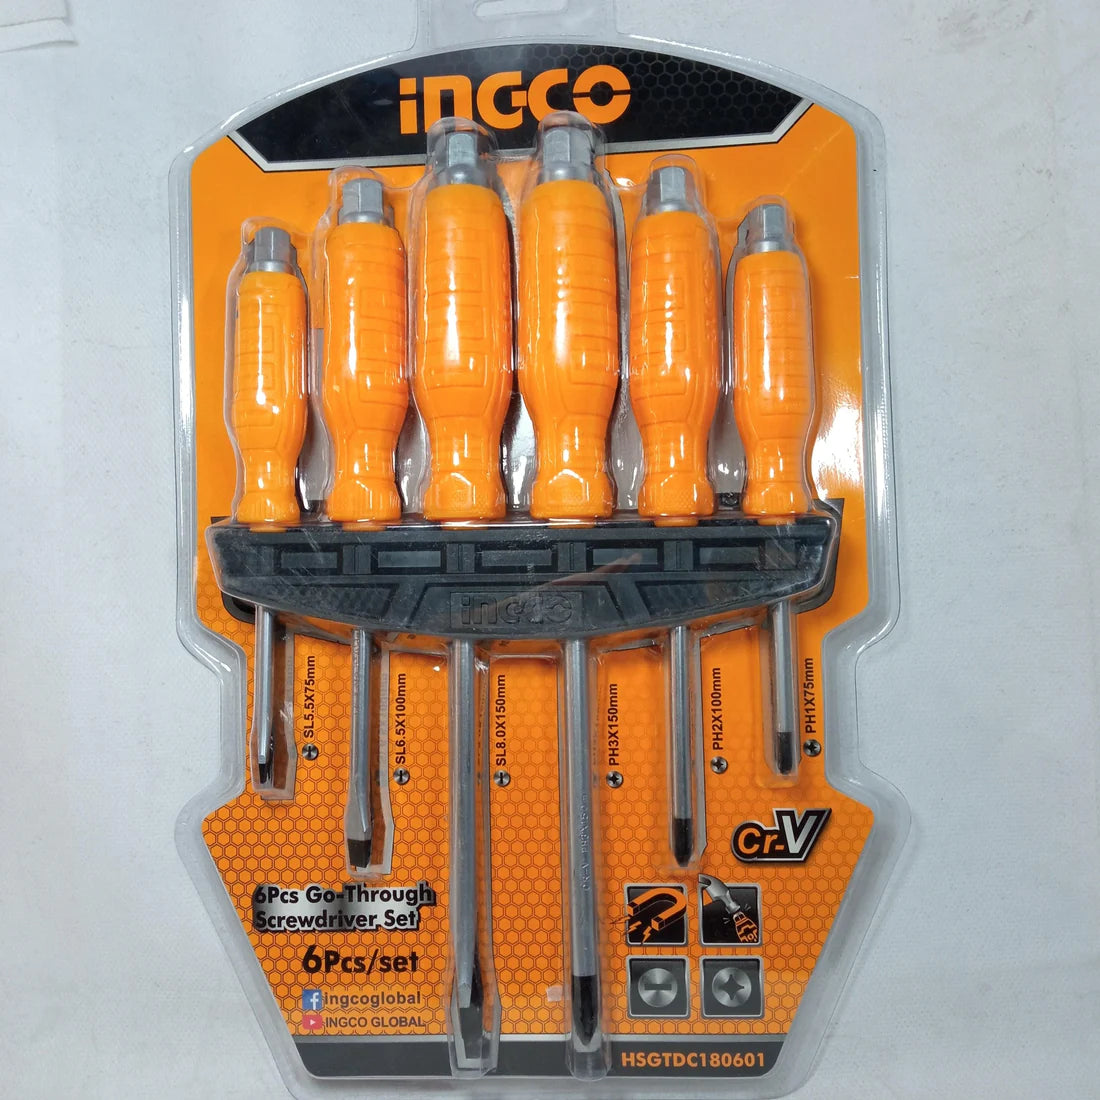 INGCO 6 PC's go-through screwdriver set for Hammering (Magnetic, 3pcs Phillips 3pcs slotted)